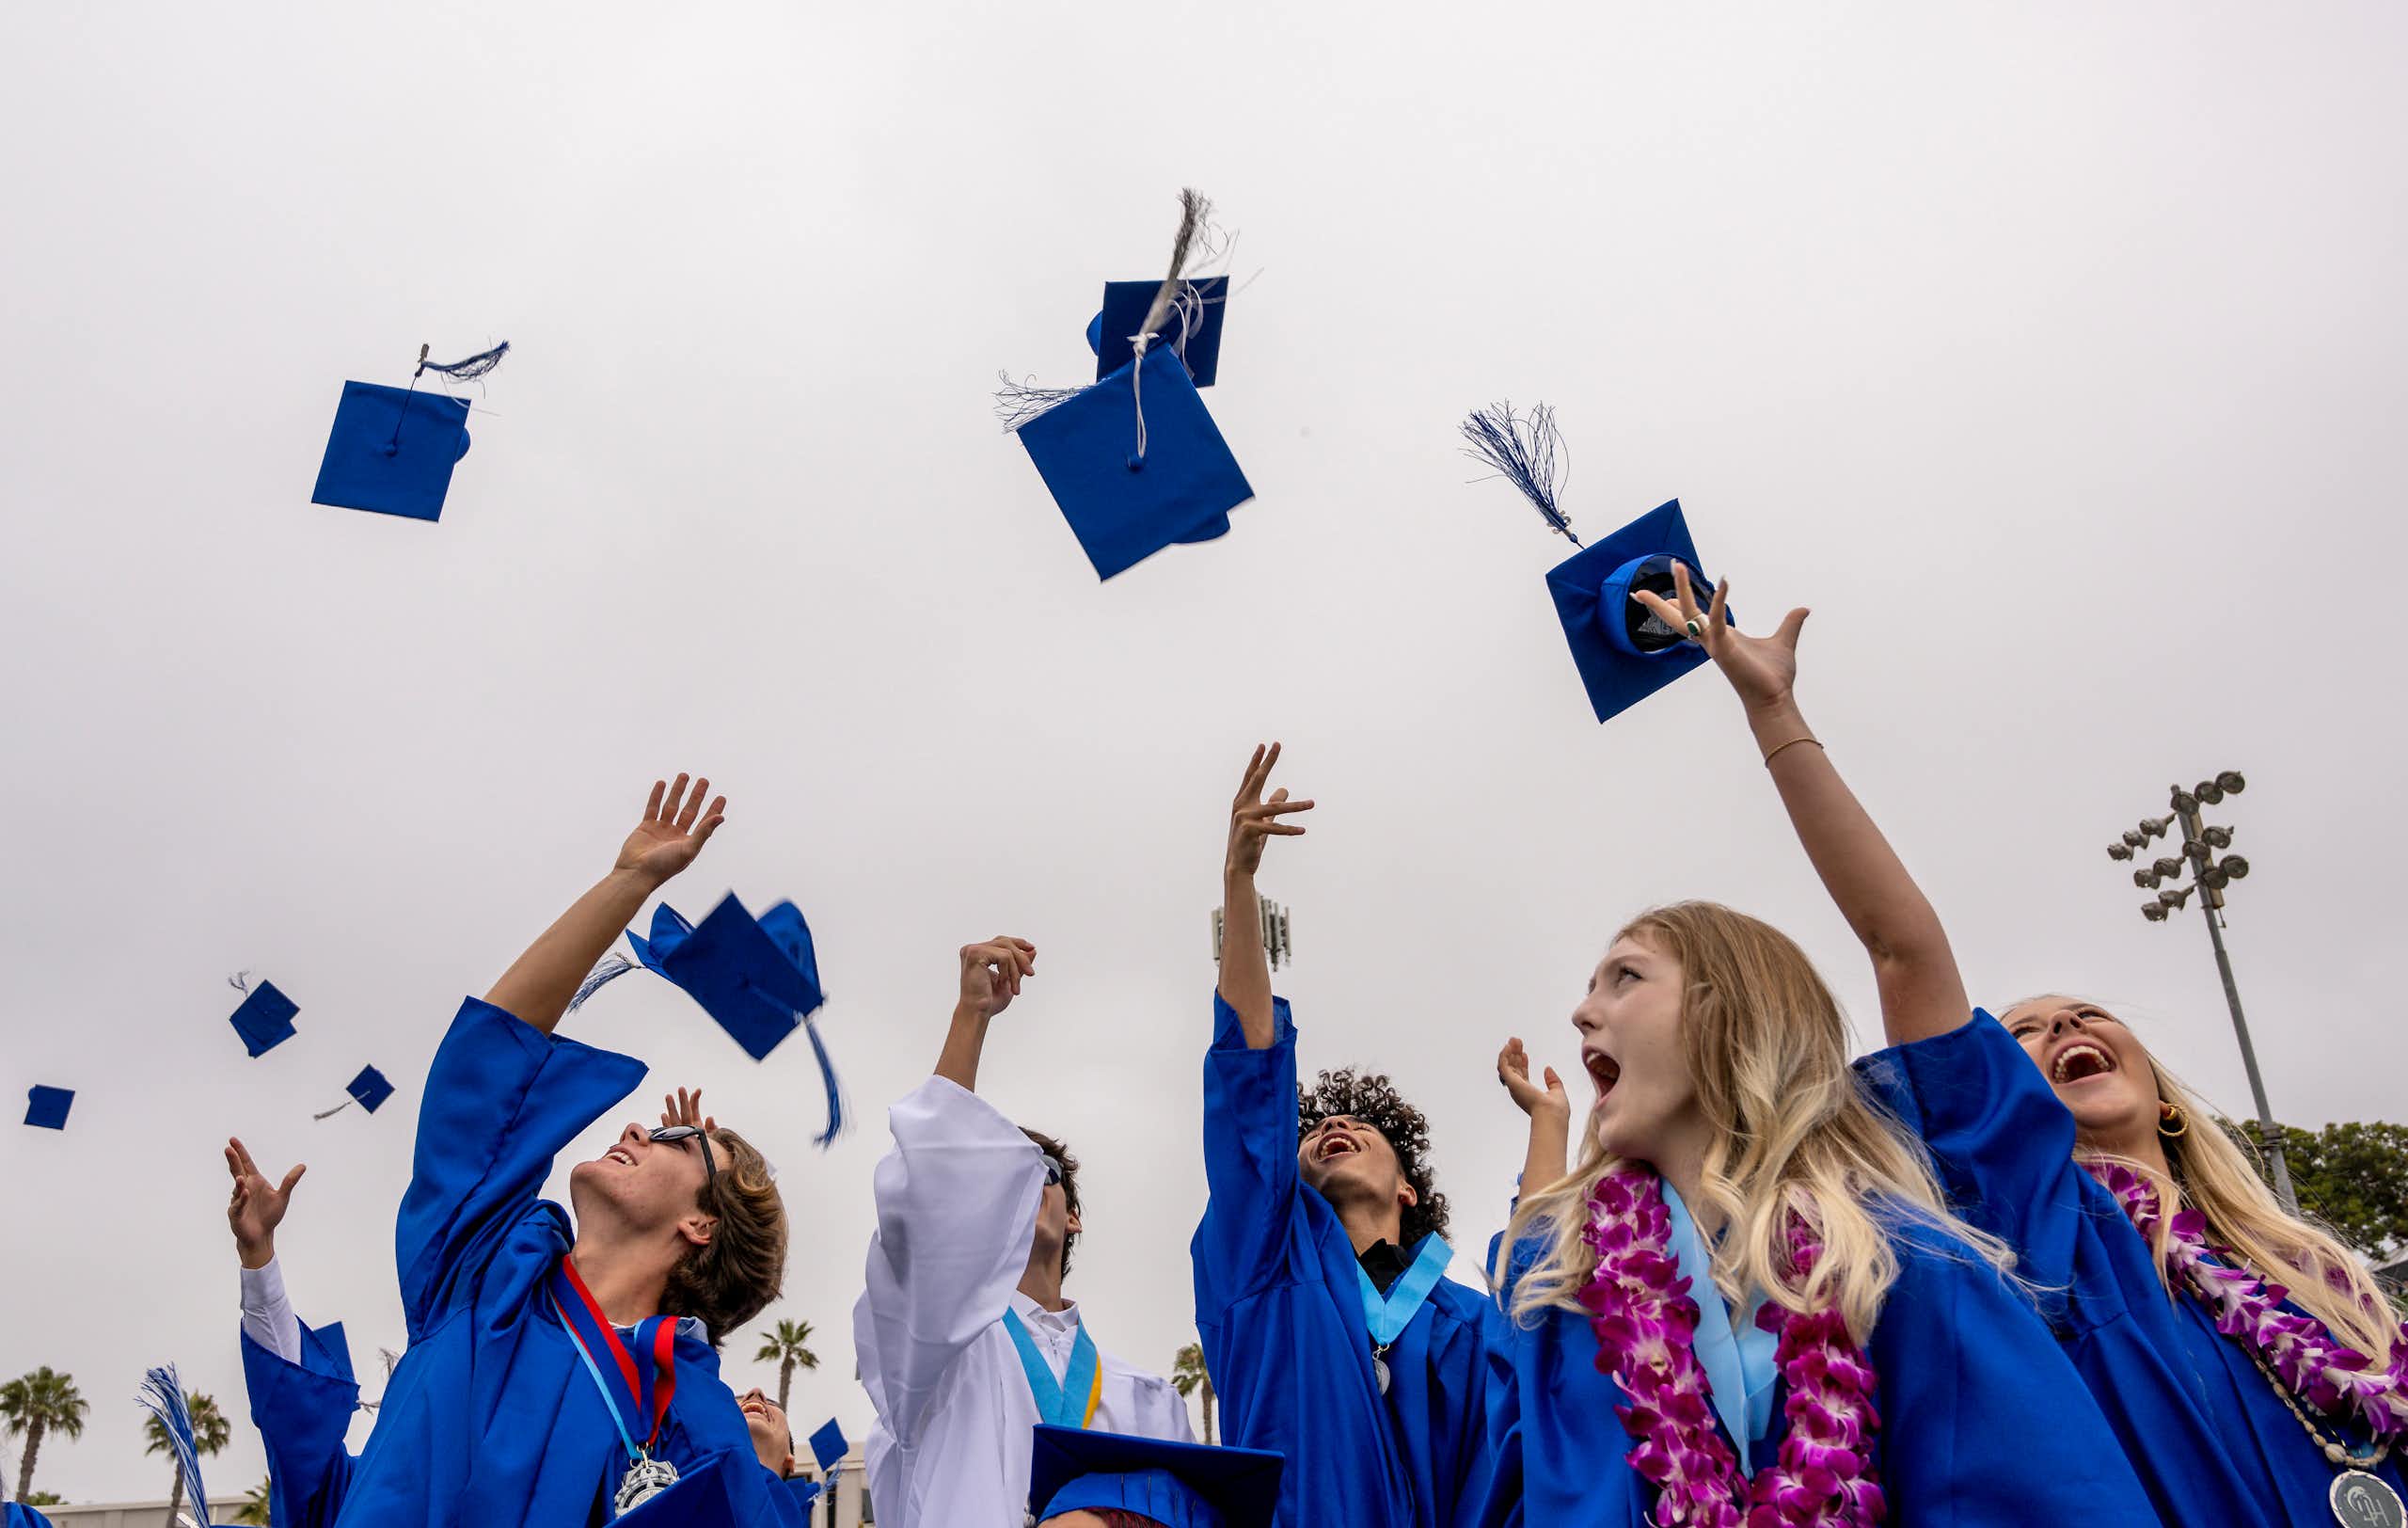 Young men and women wearing blue gowns throw their blue caps in the air in celebration.